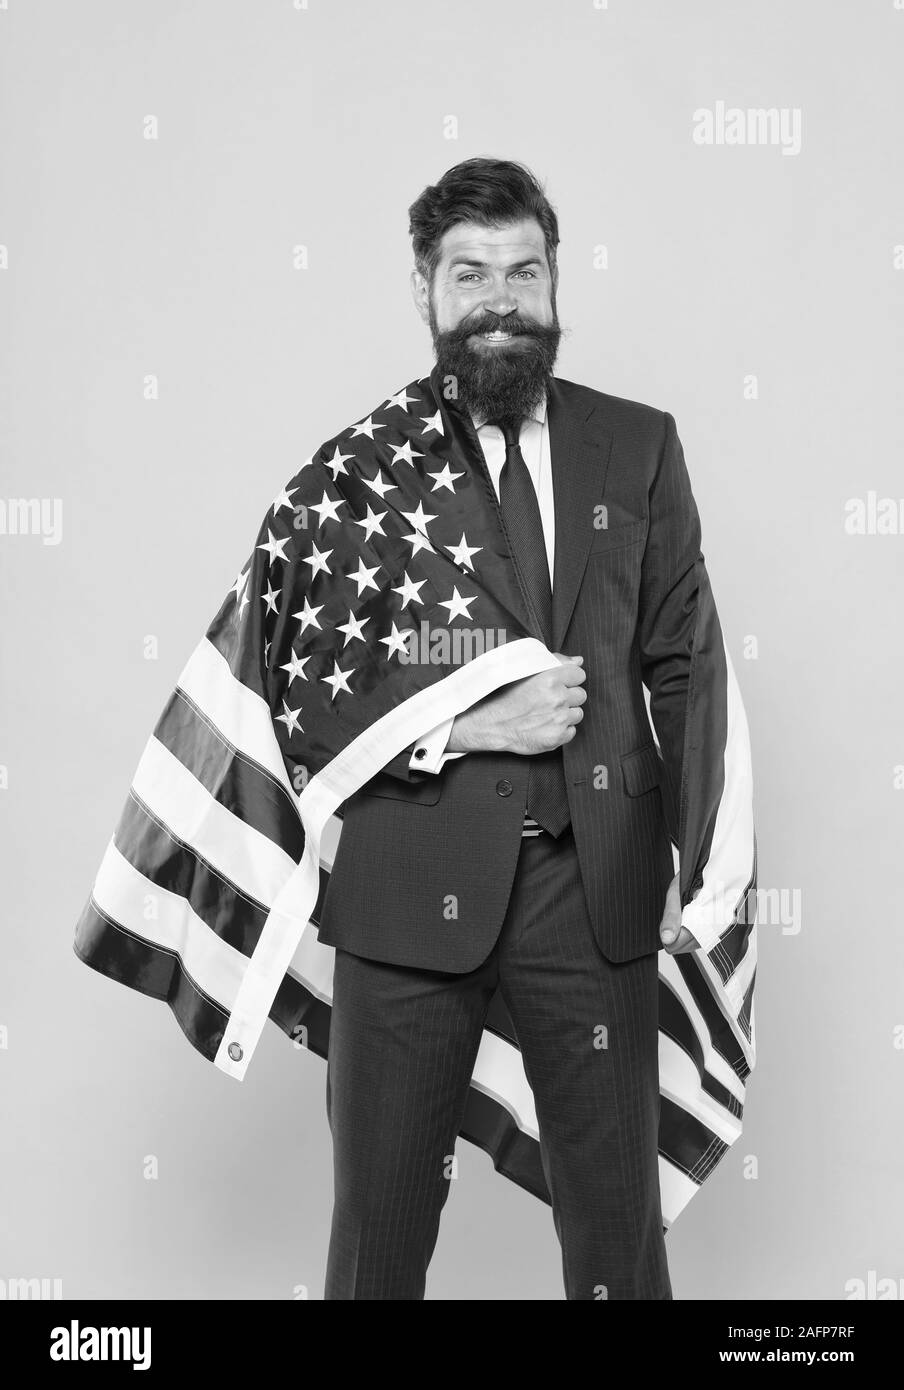 Successful businessman lawyer or politician. Business people. Independence Businessman bearded man in formal suit hold flag USA. Businessman concept. means decide according to law and facts. Stock Photo